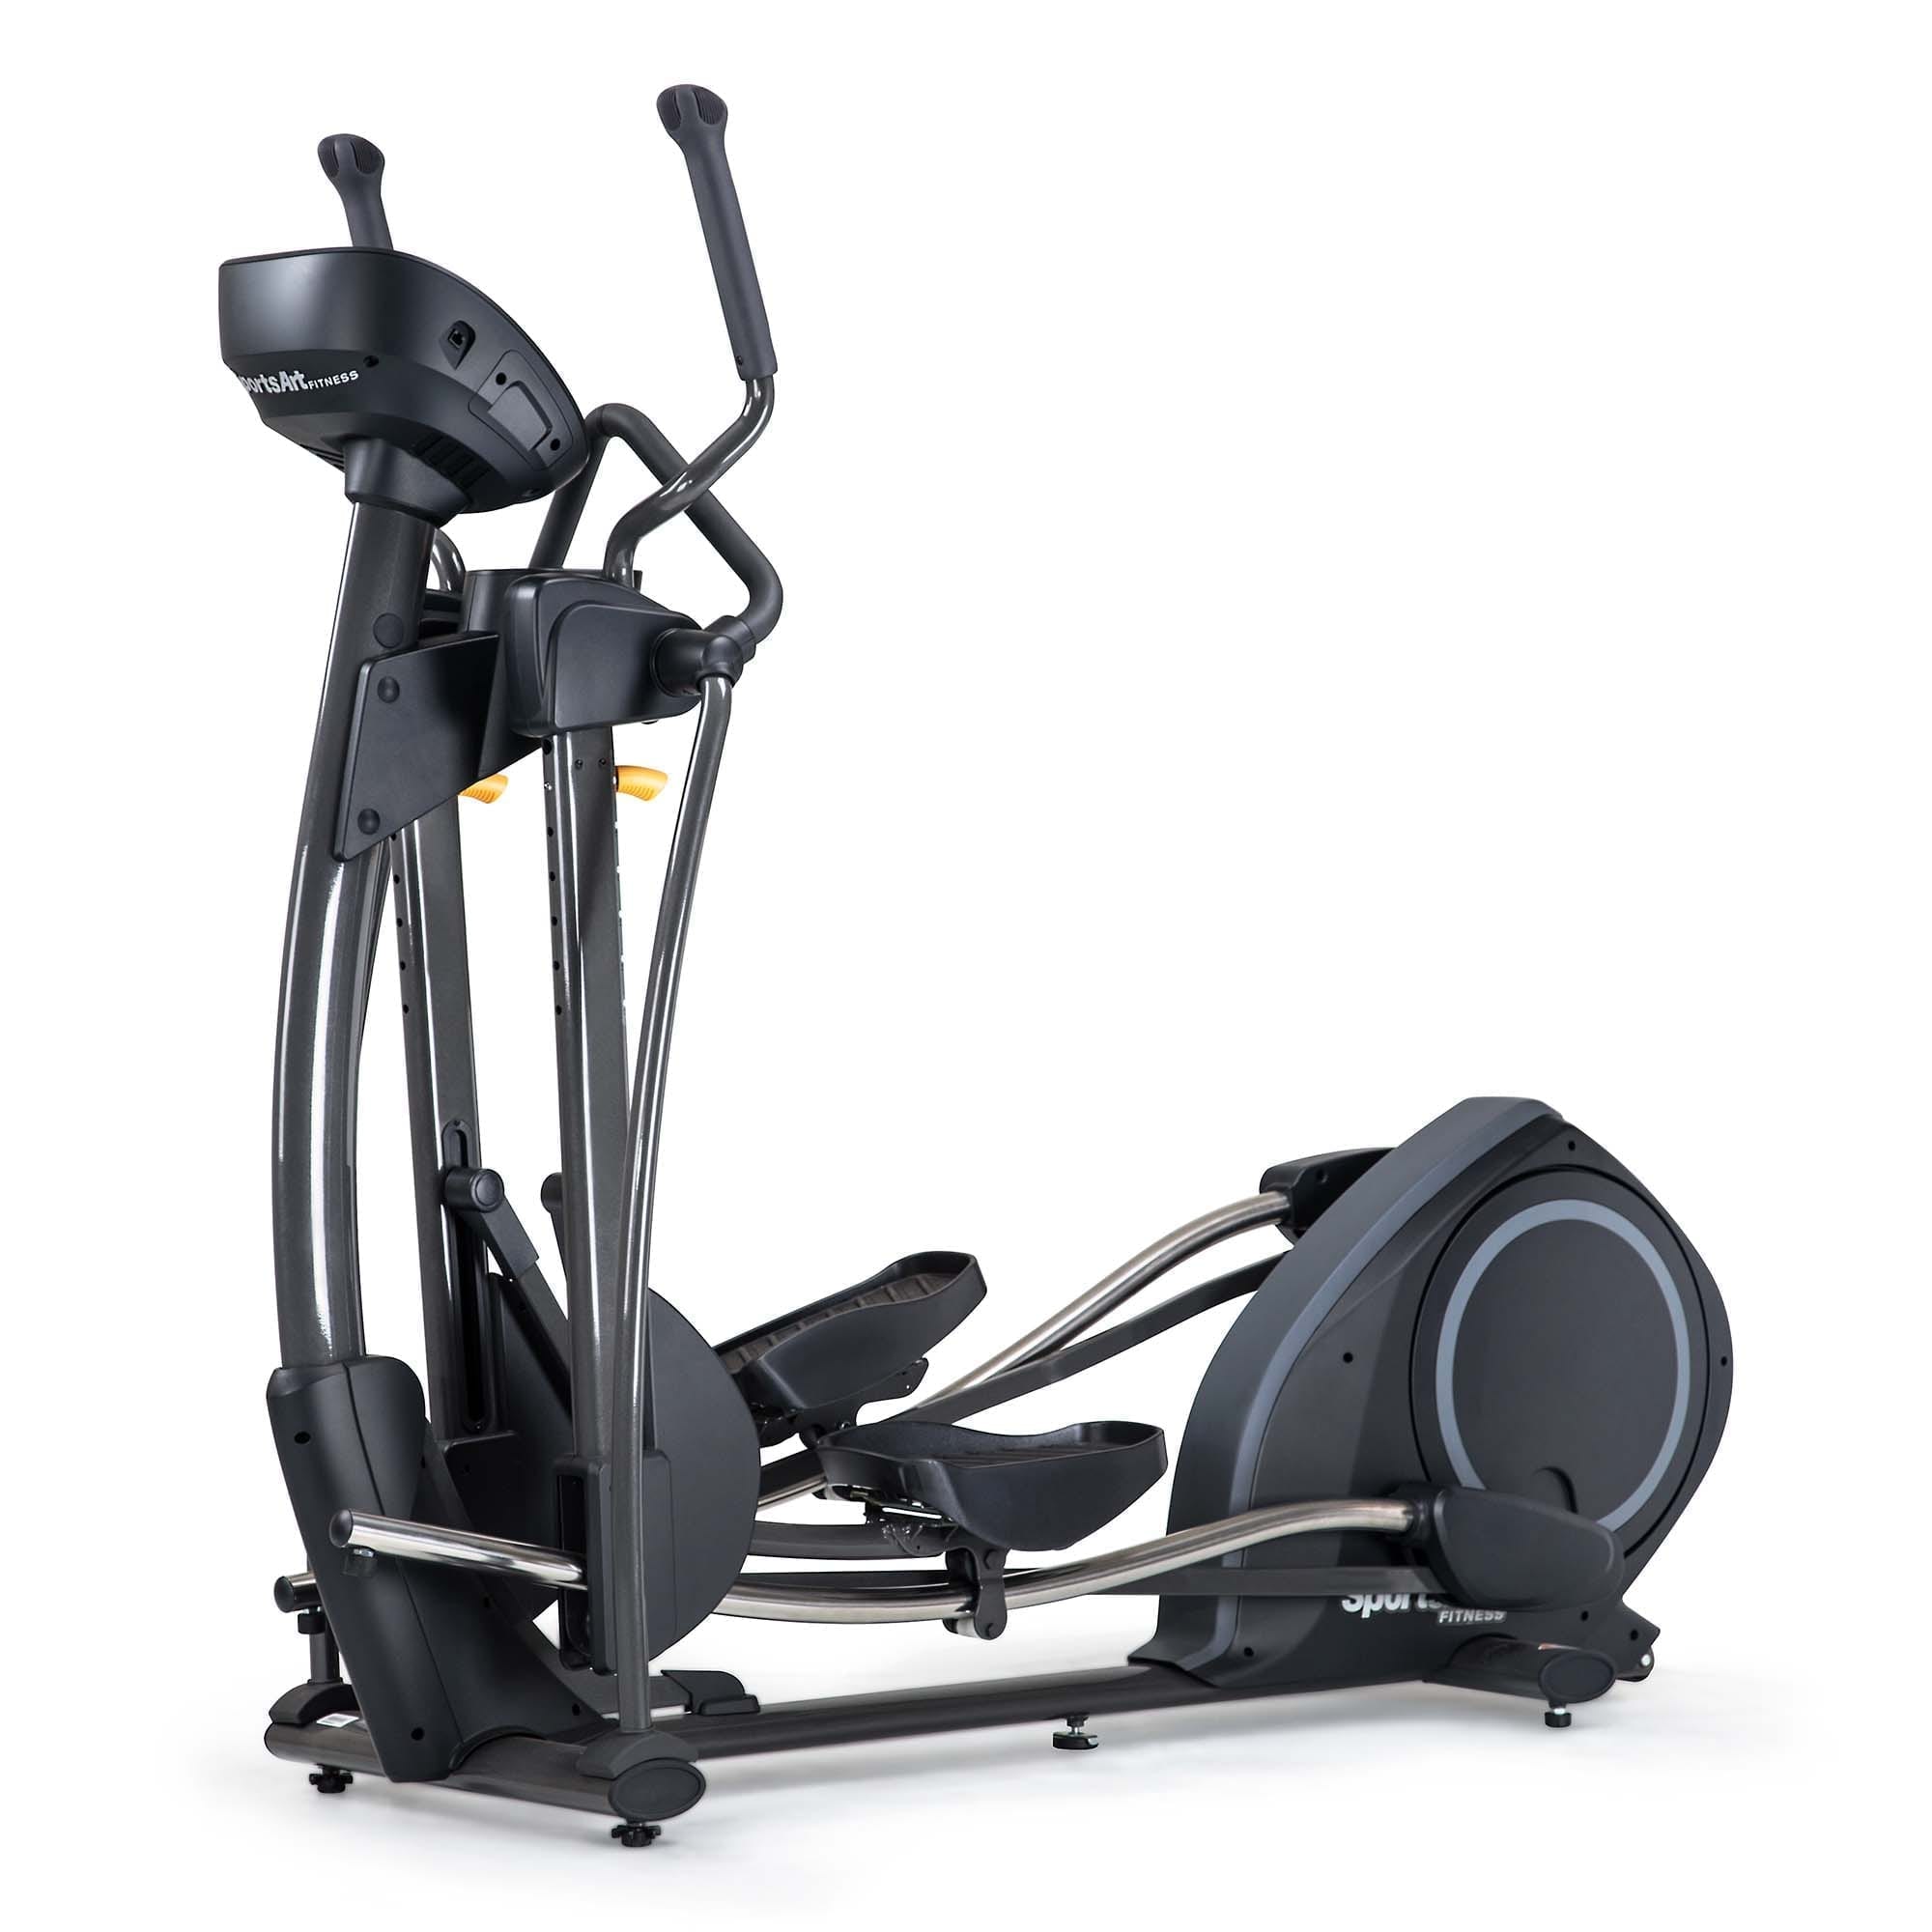 SportsArts Foundation Self Generating Elliptical E835 front facing angle side view